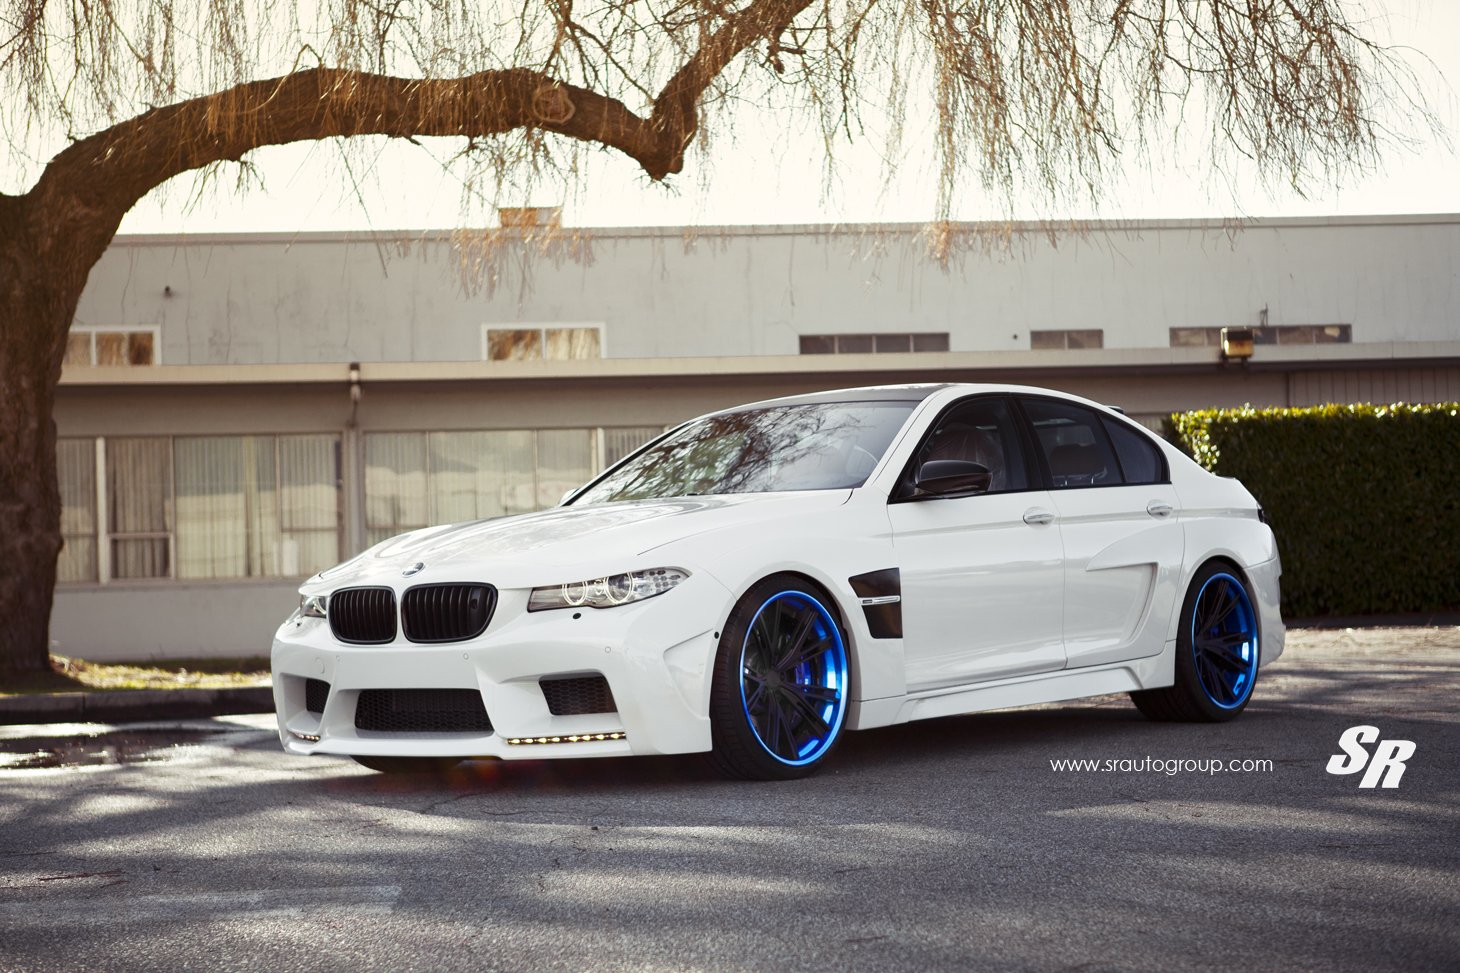 bmw, F10, M5, Hamann, Mission, Widebody, White, Pur, Wheels, Cars, Tuning Wallpaper